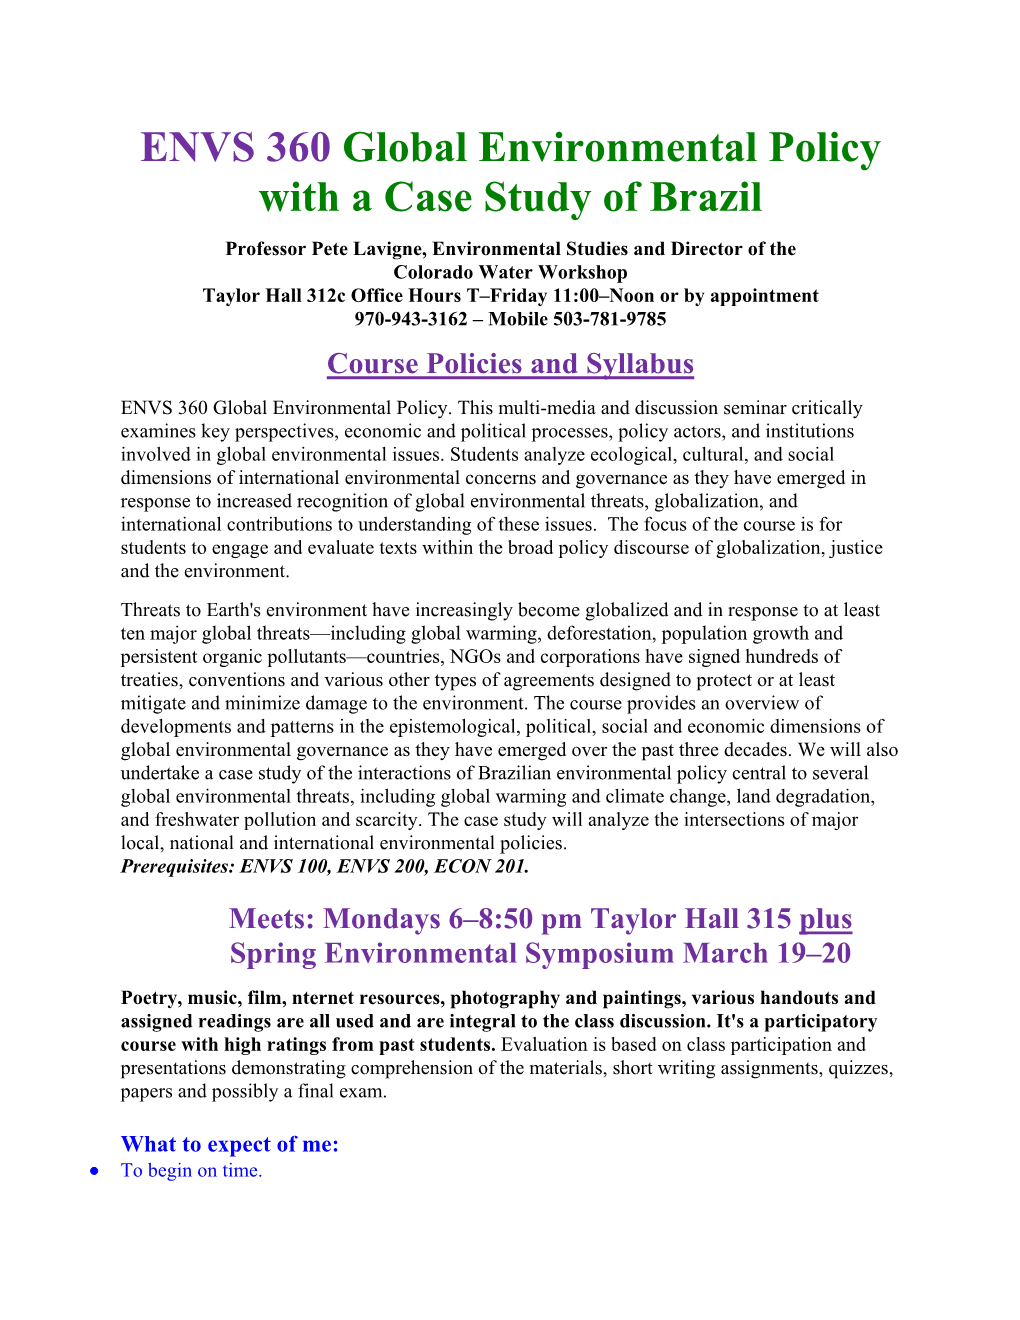 Global Environmental Policy with a Case Study of Brazil